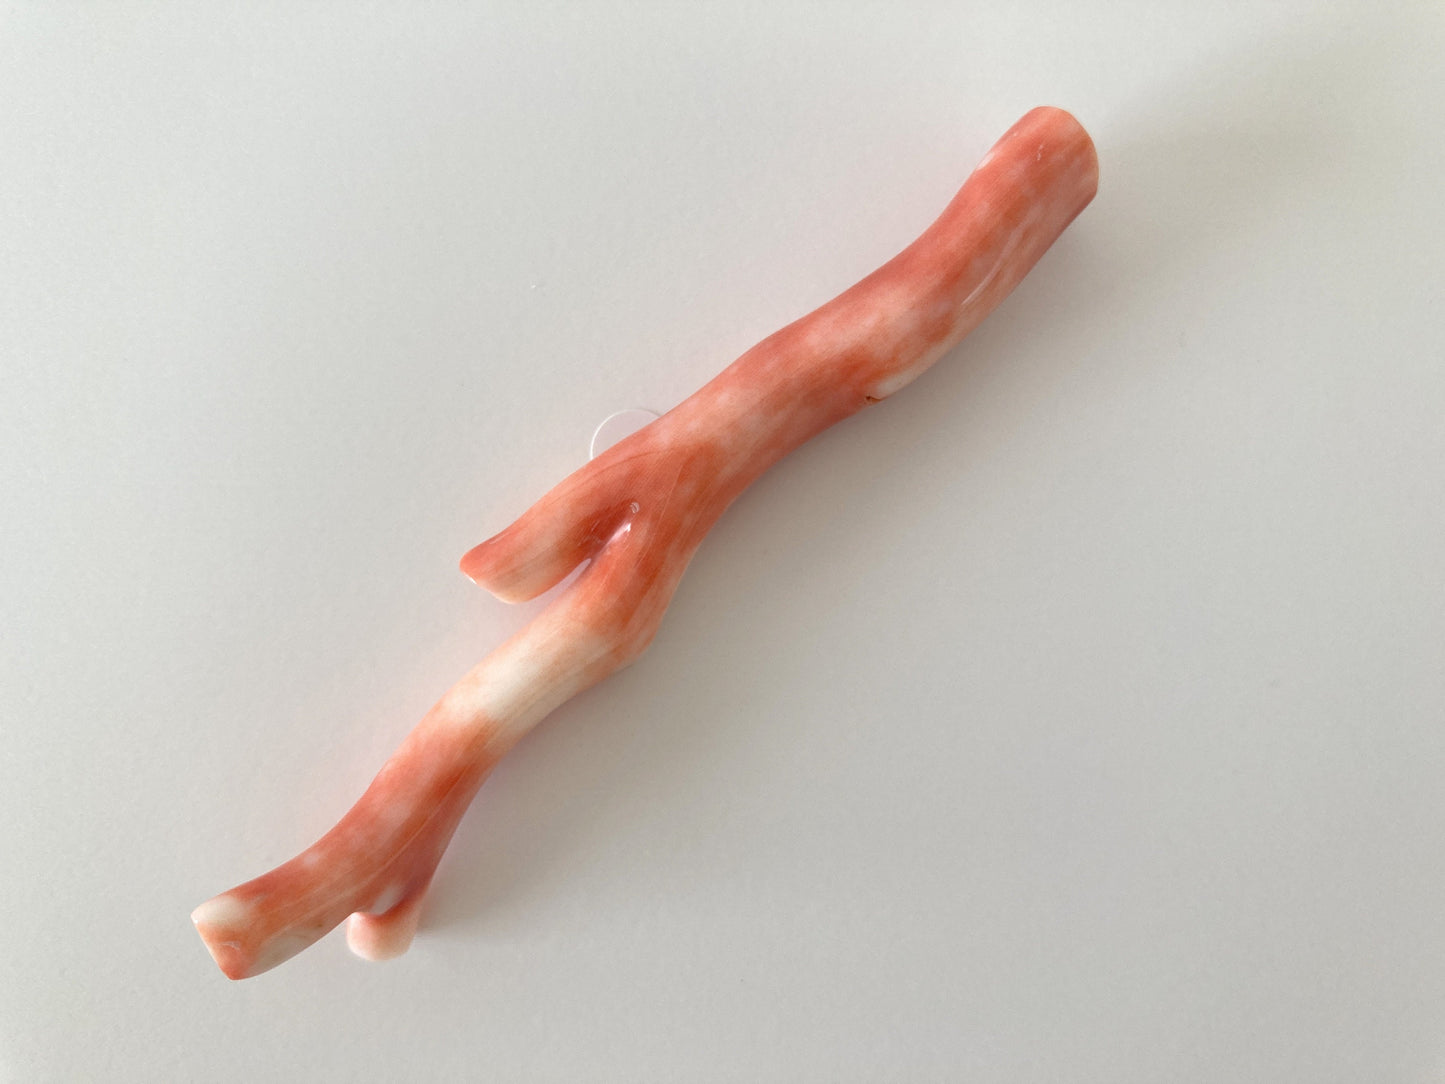 Coral branch 96mm, Japanese Momo Coral Branch, Natural Orange Color Coral Branch, Genuine Coral, For Jewelry making